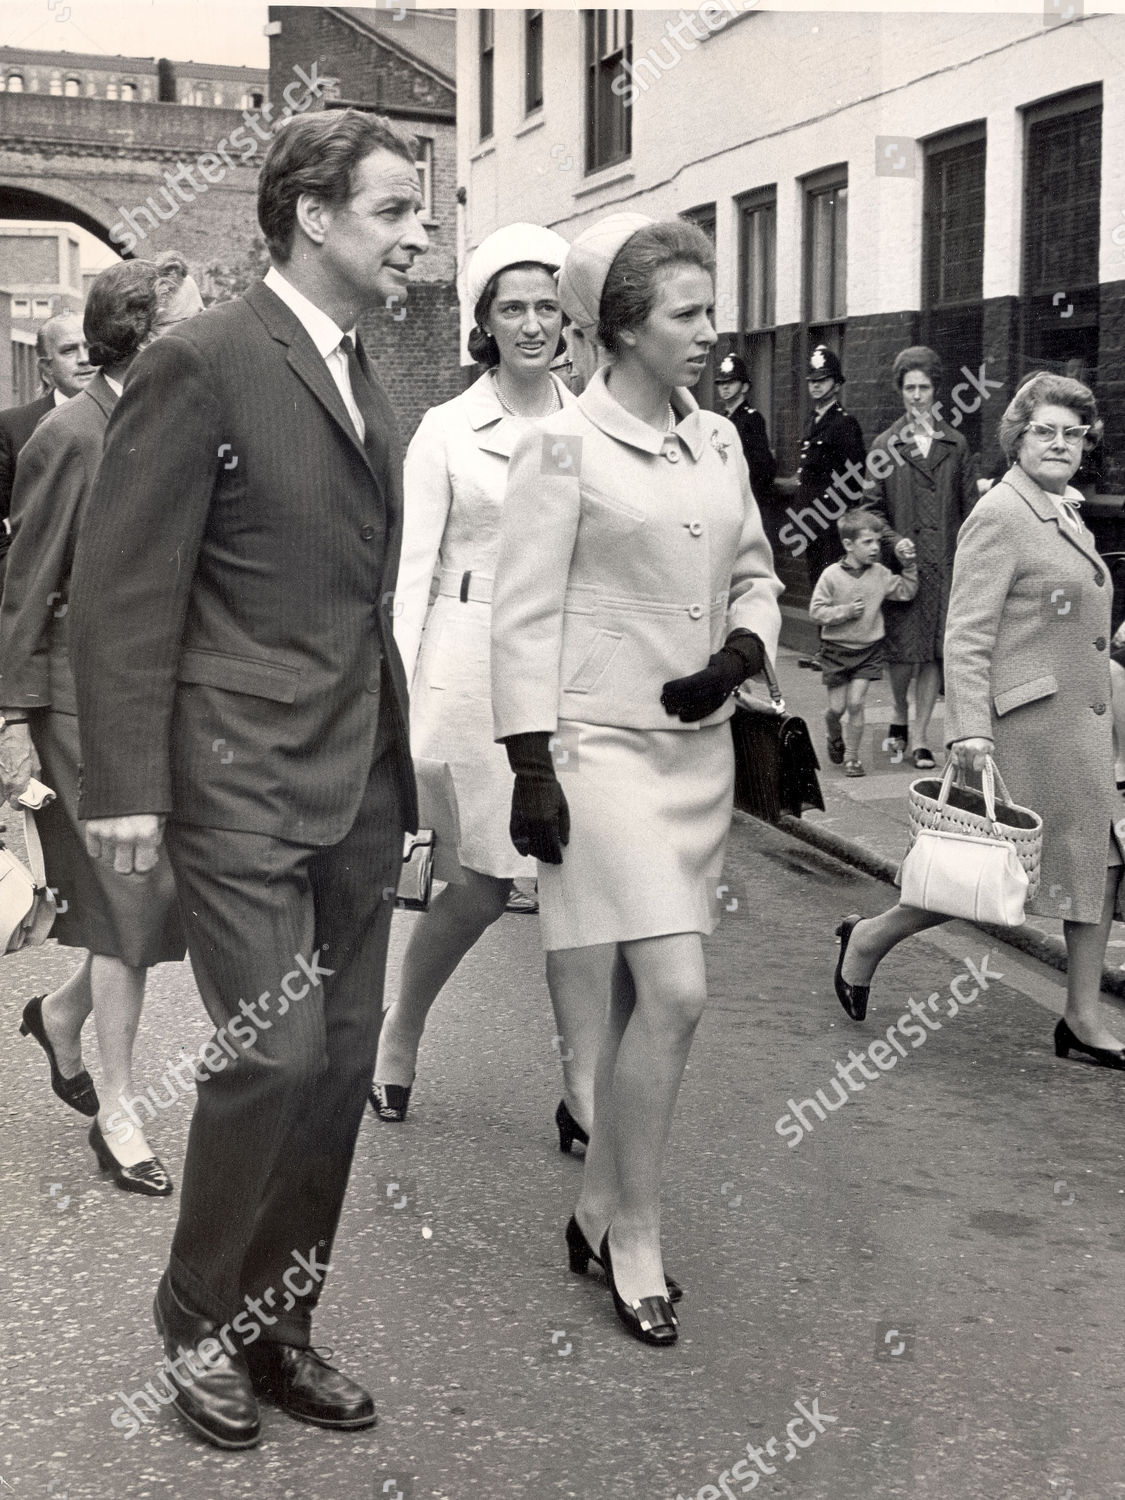 princess-anne-now-princess-royal-1969-picture-shows-princess-anne-opening-the-blackfriars-youth-centre-in-st-alpheges-hall-rushworth-street-london-se1-shutterstock-editorial-890823a.jpg